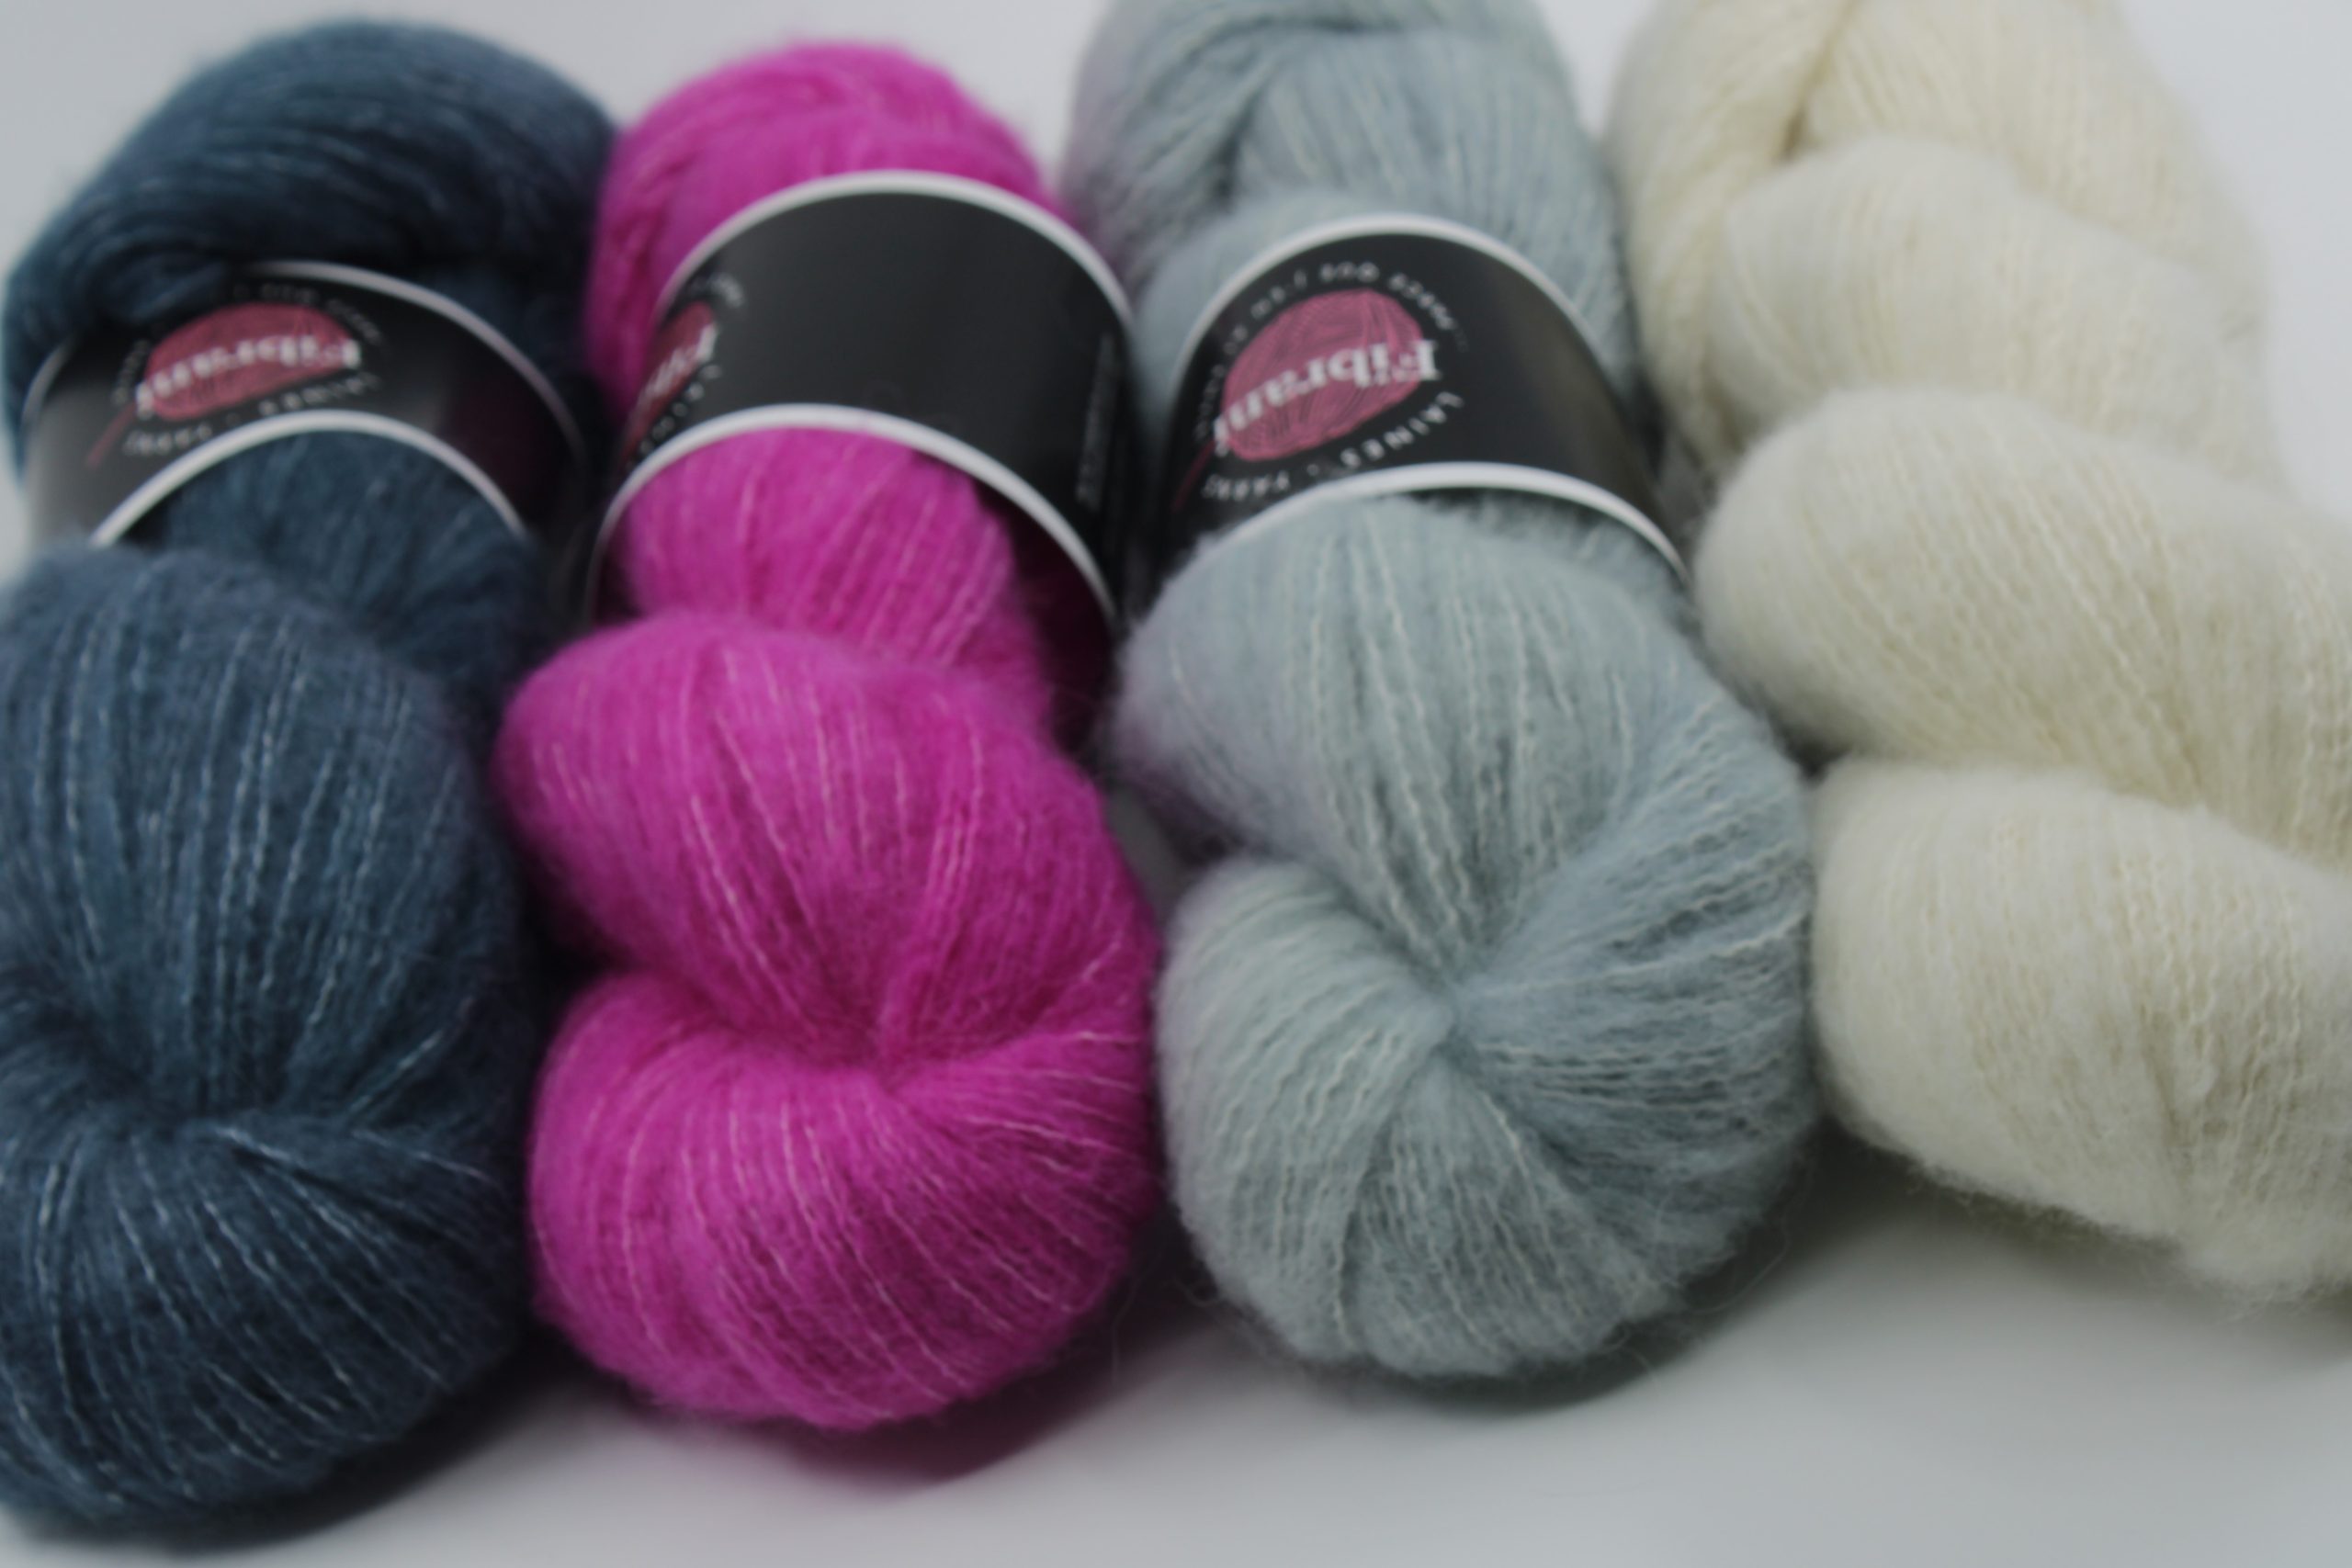 Fibrani wool collection. Nuage, made from baby alpaca, Pima cotton and merino wool.